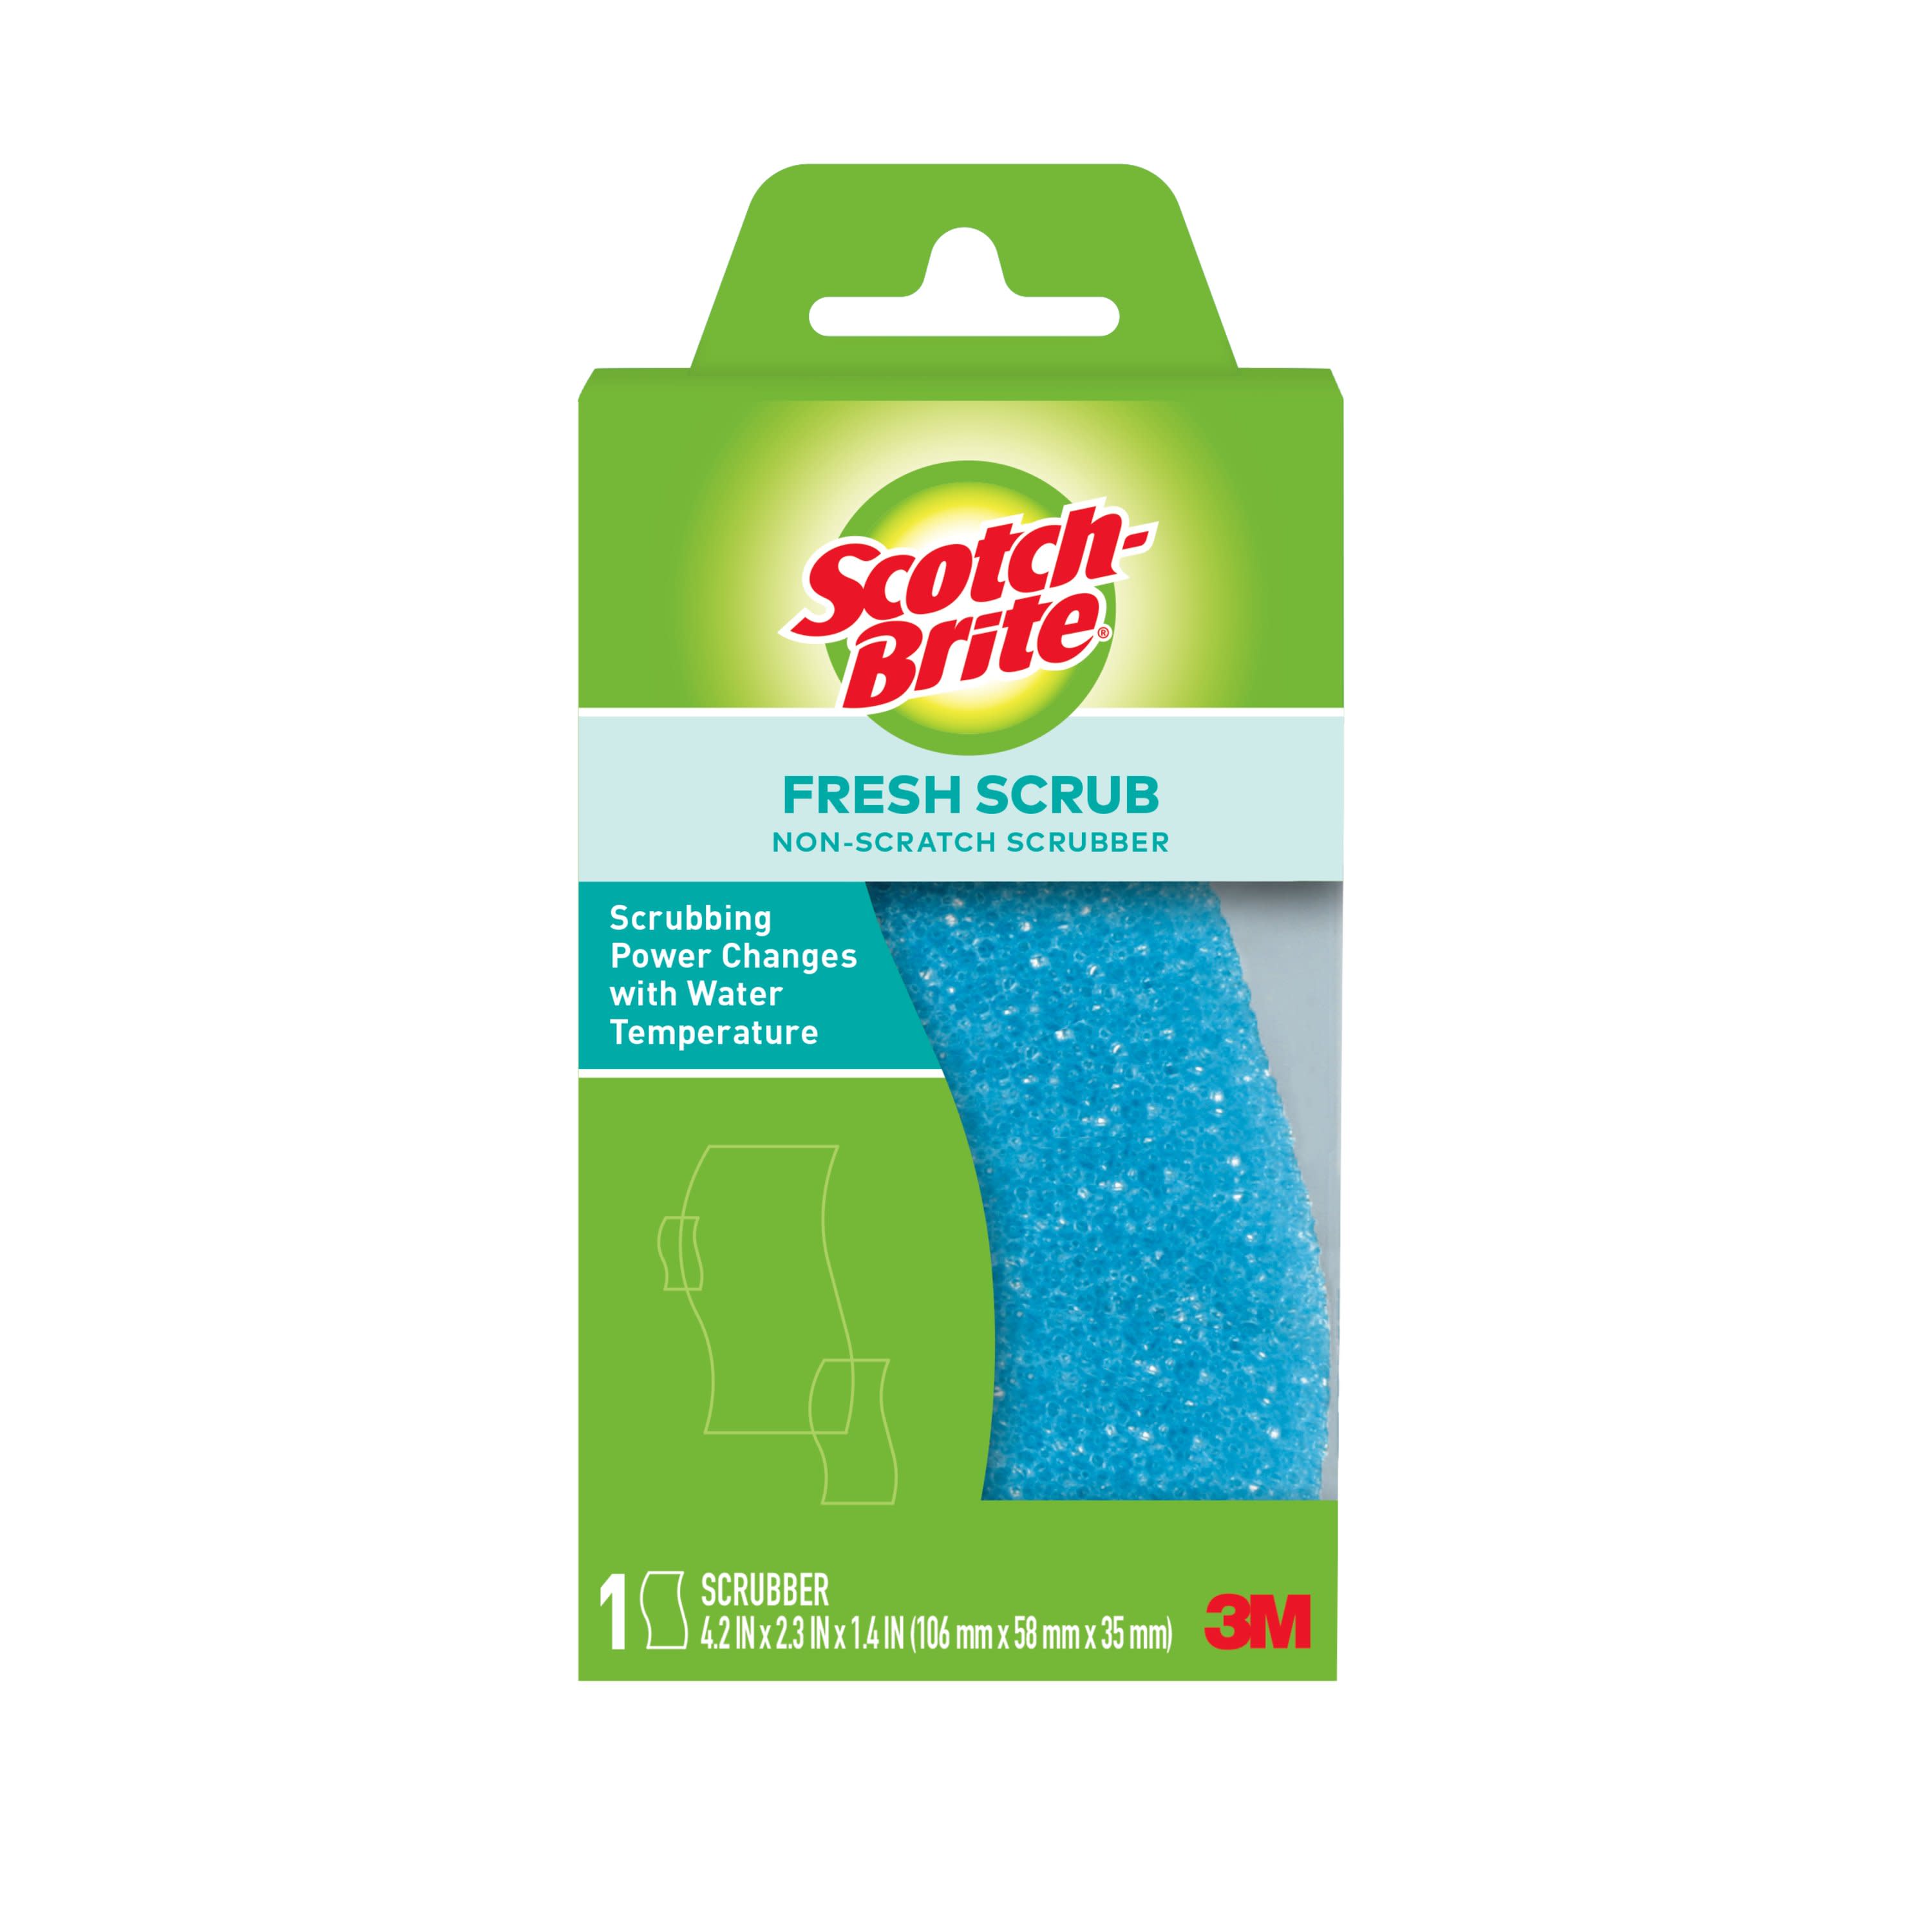  Scotch-Brite Power Scour Toilet Cleaning System